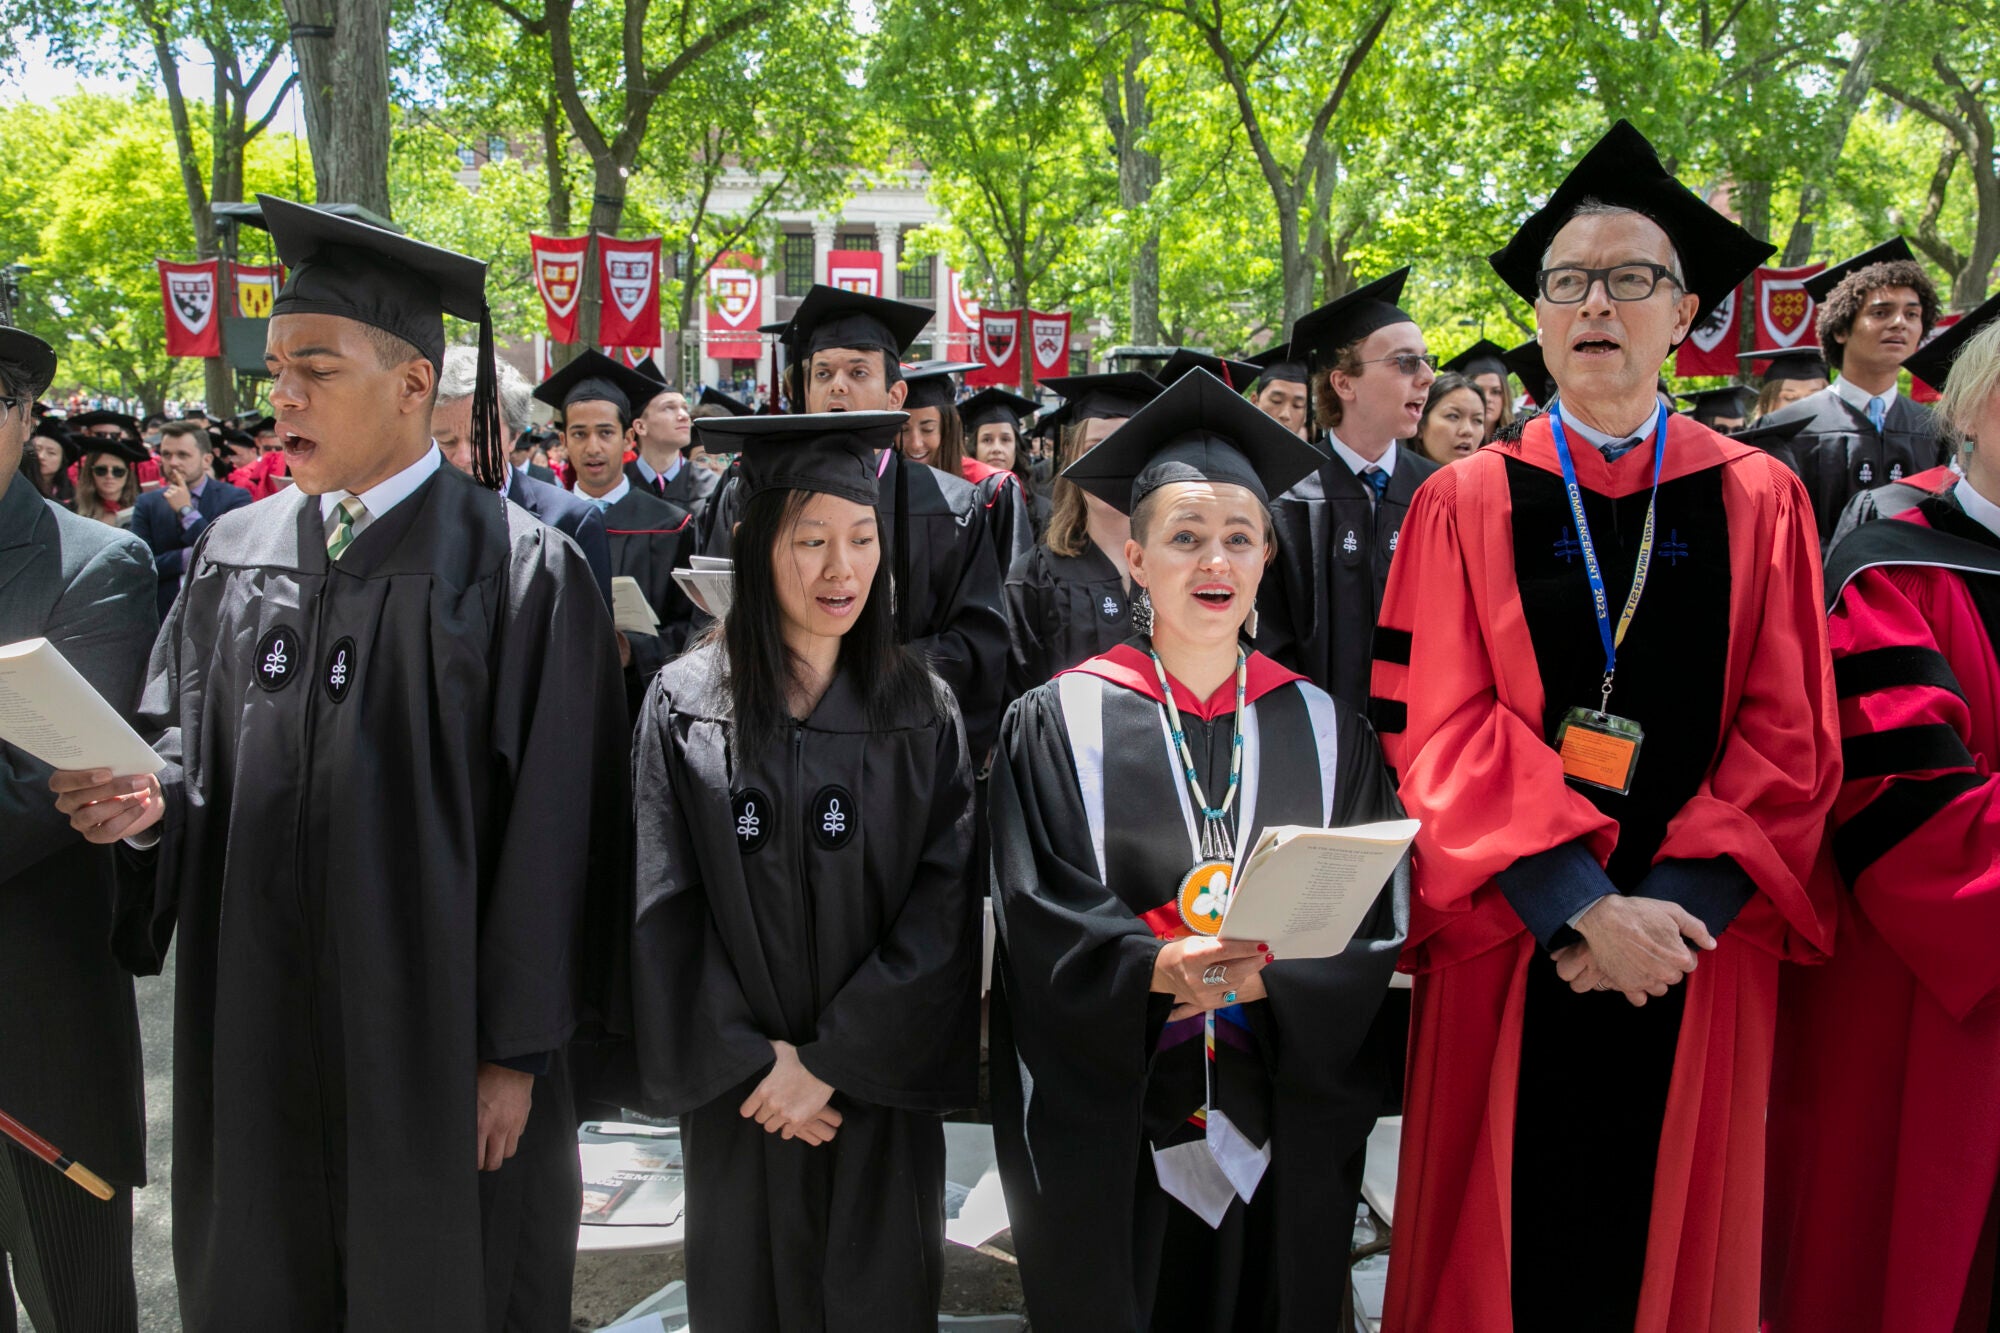 Harvard graduates standing in front of the crowd